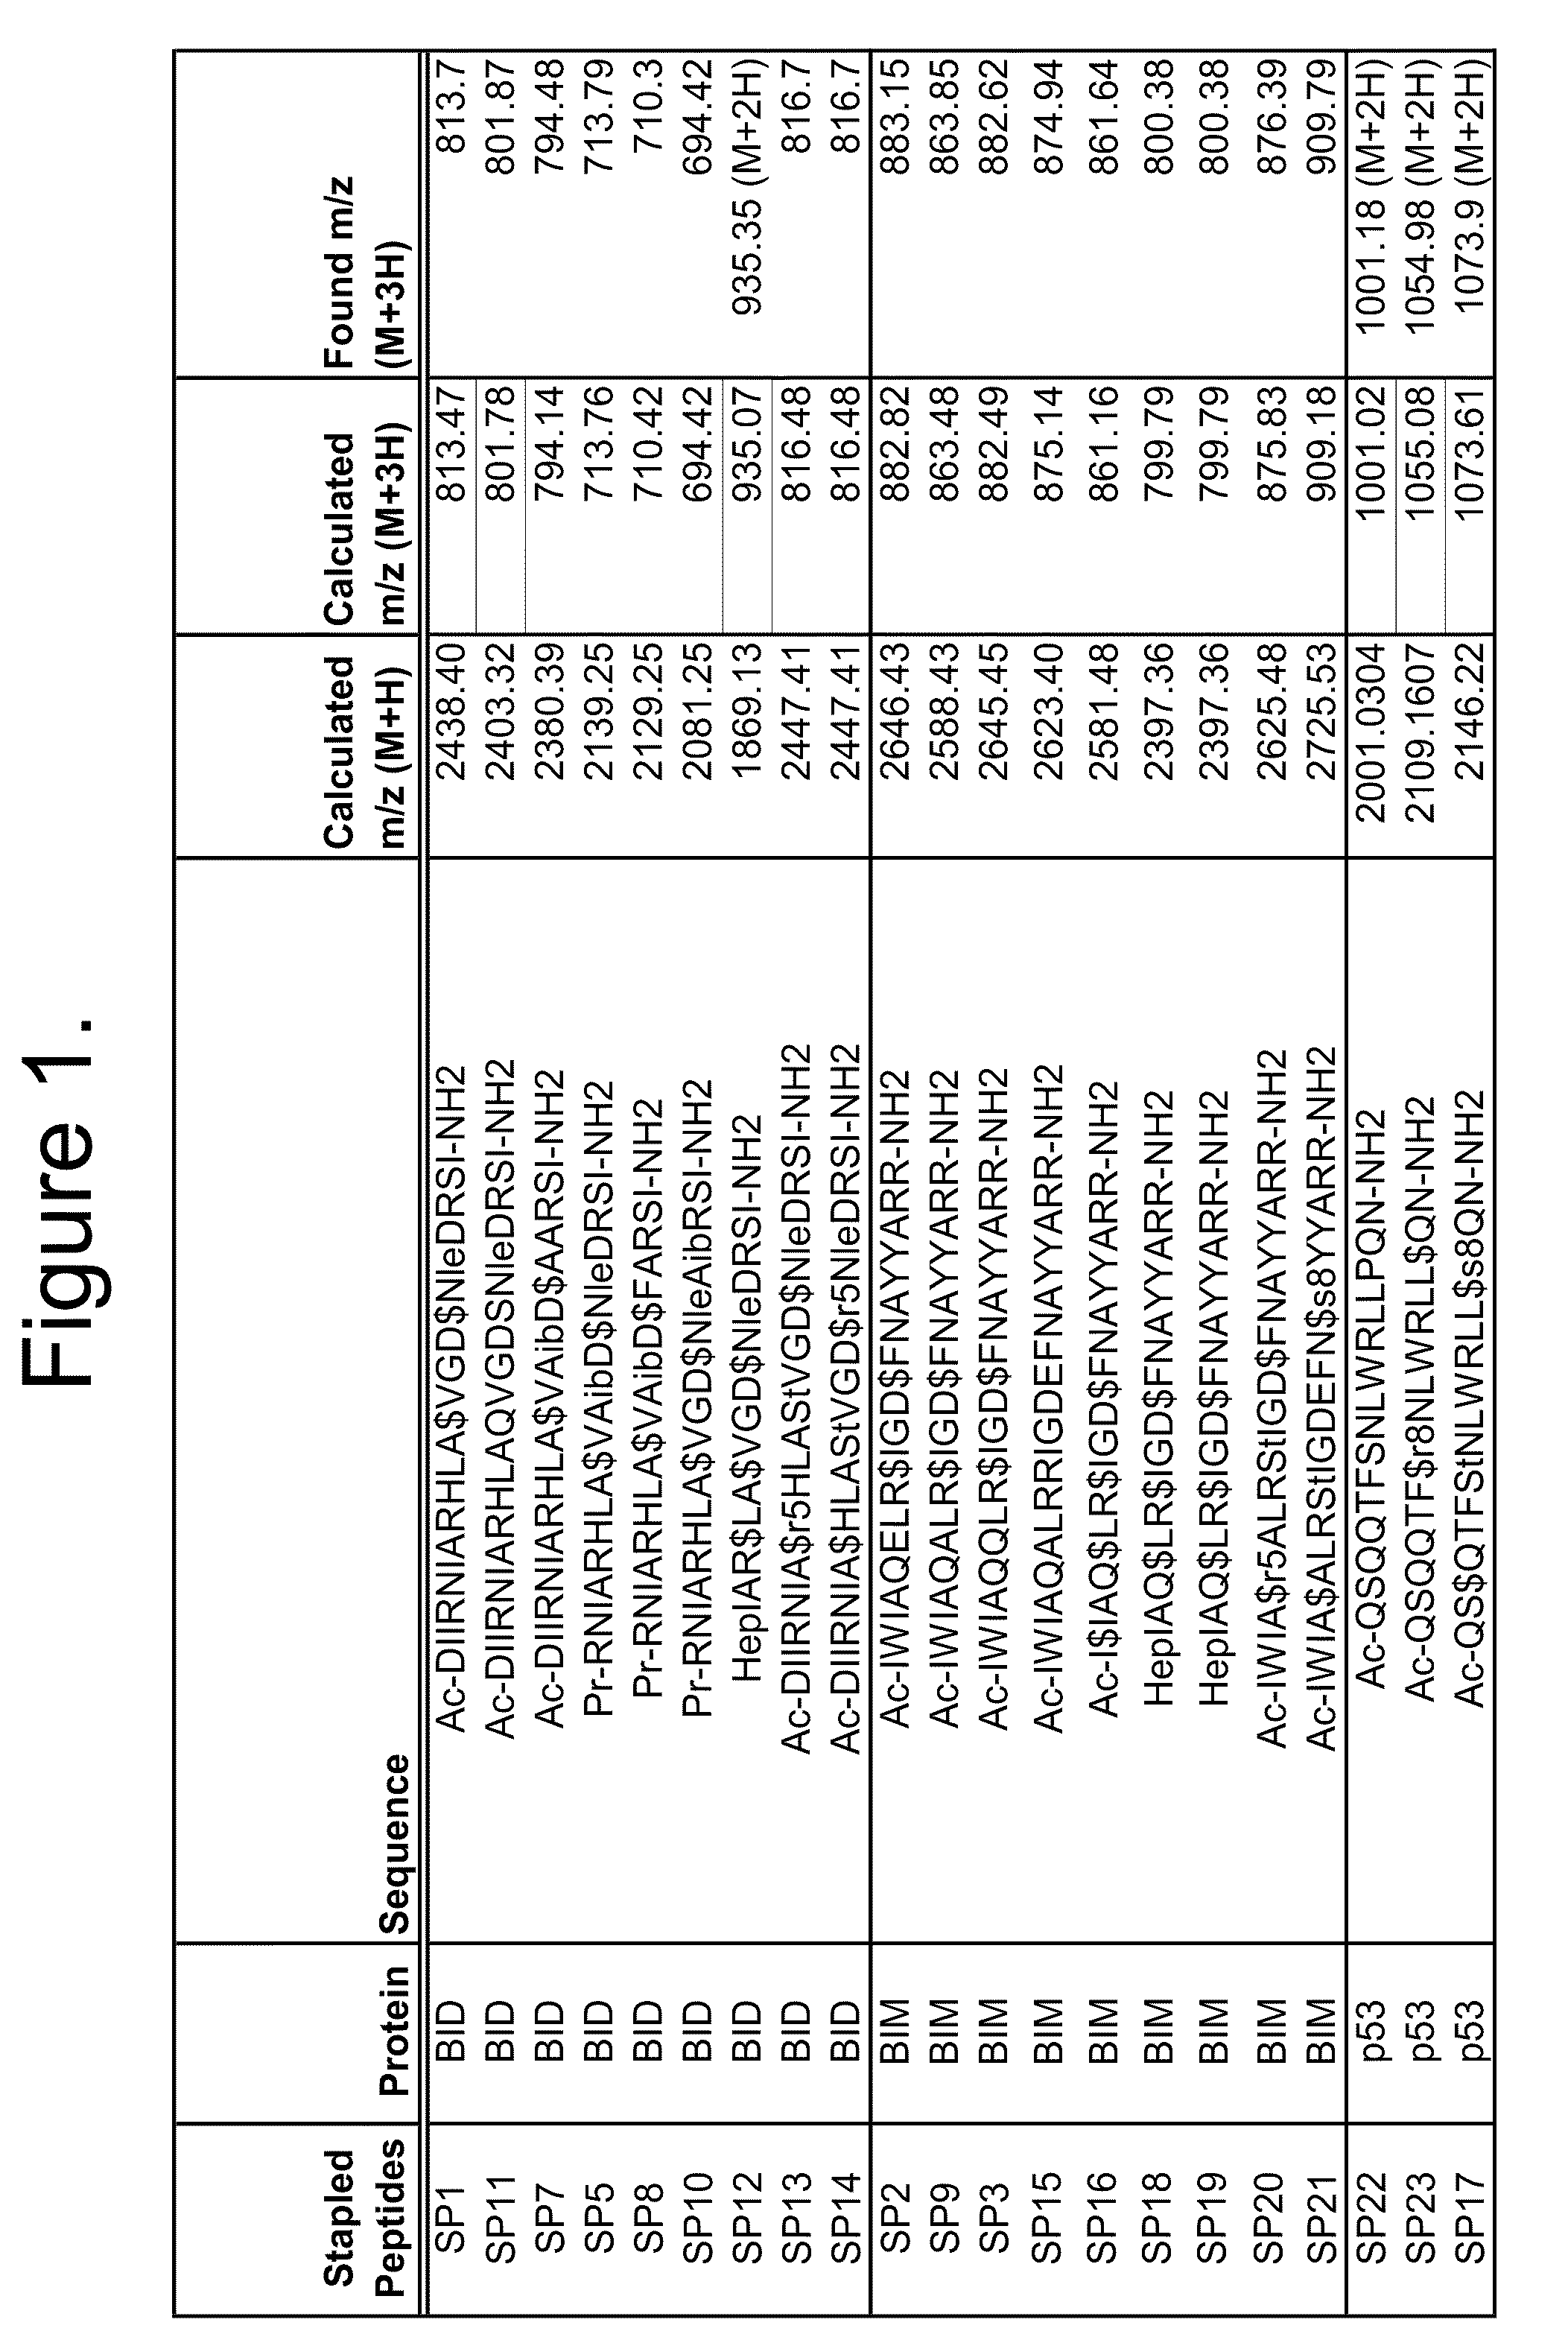 Peptidomimetic macrocycles with improved properties